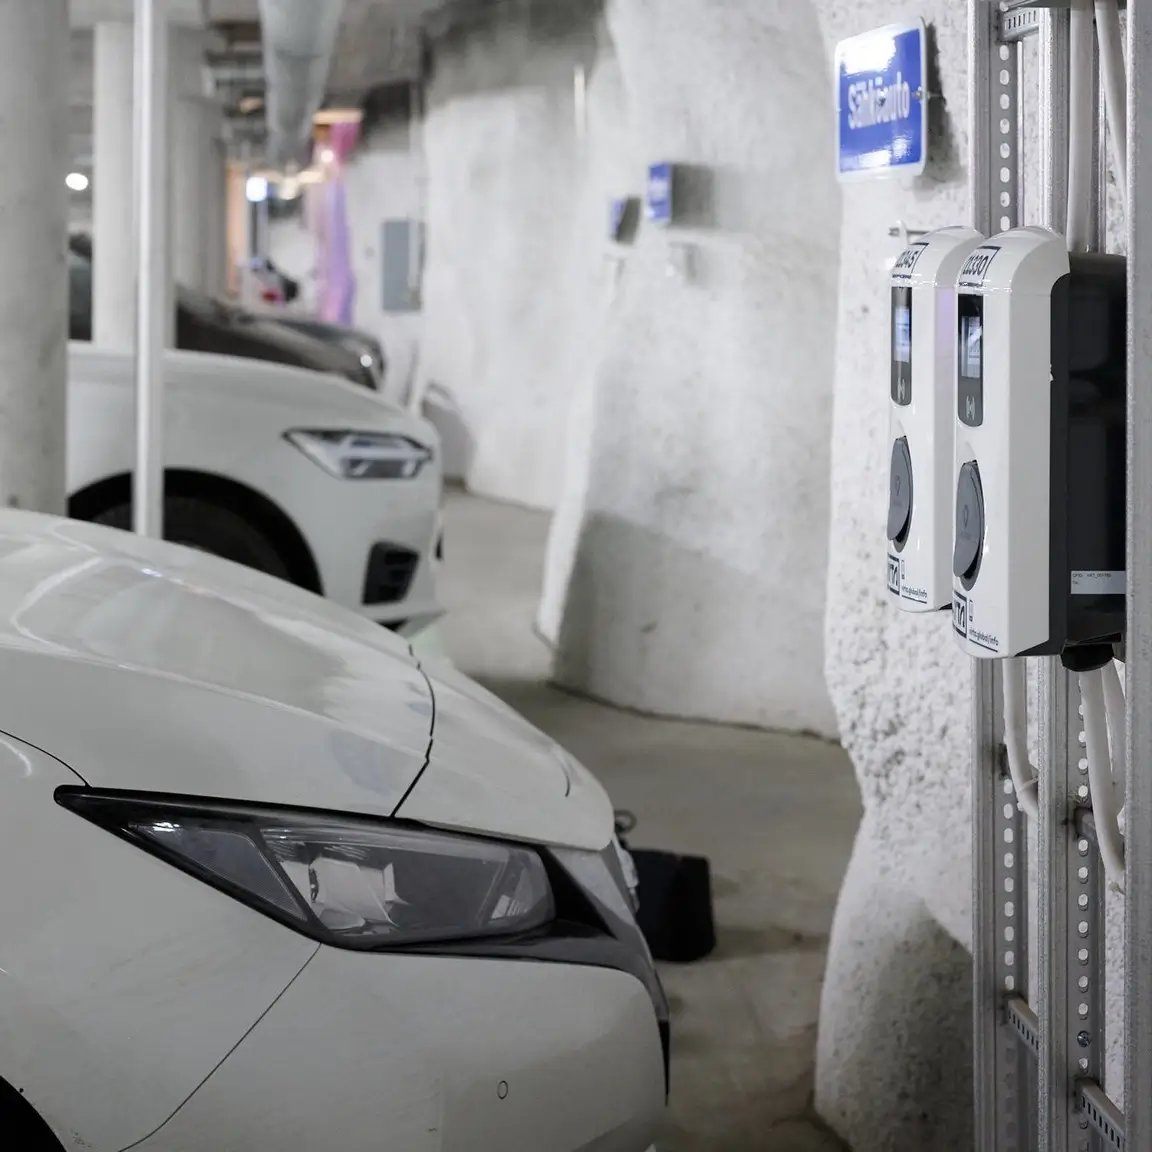 Electrical vehicles AC charging stations in white parking garage